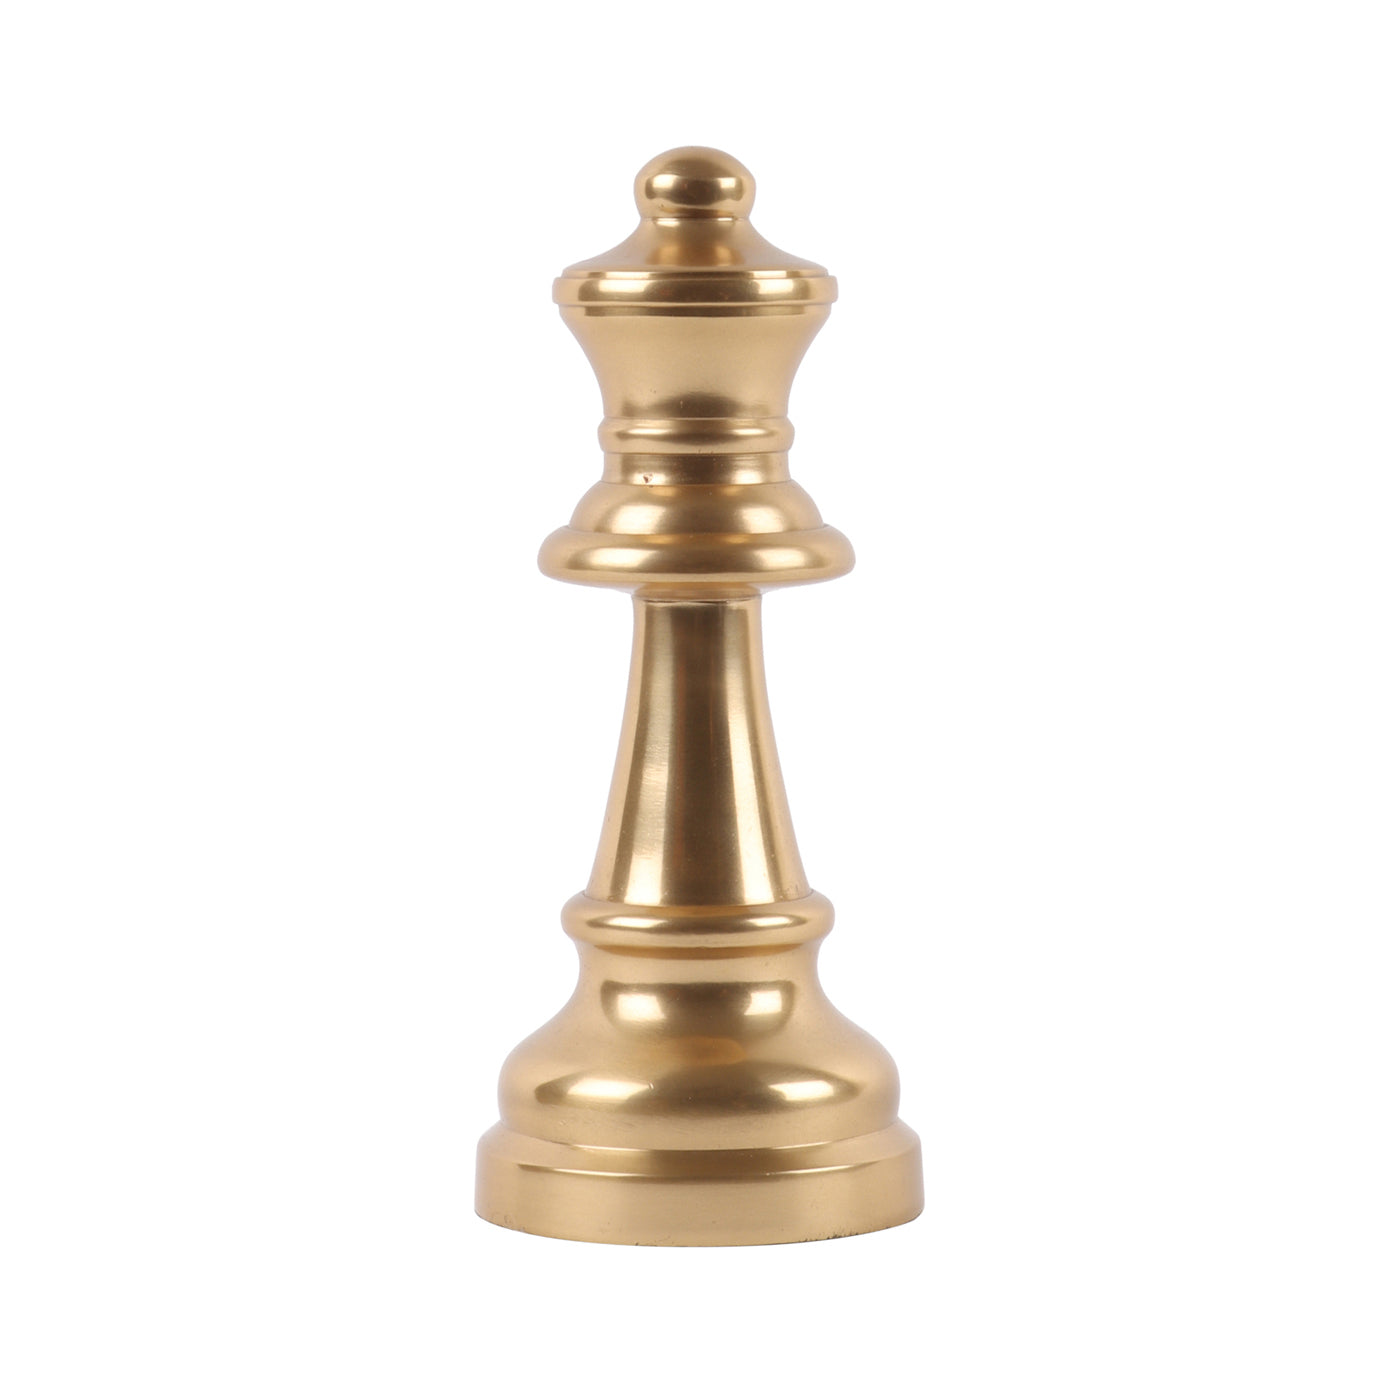 Decorative chess king queen gold large